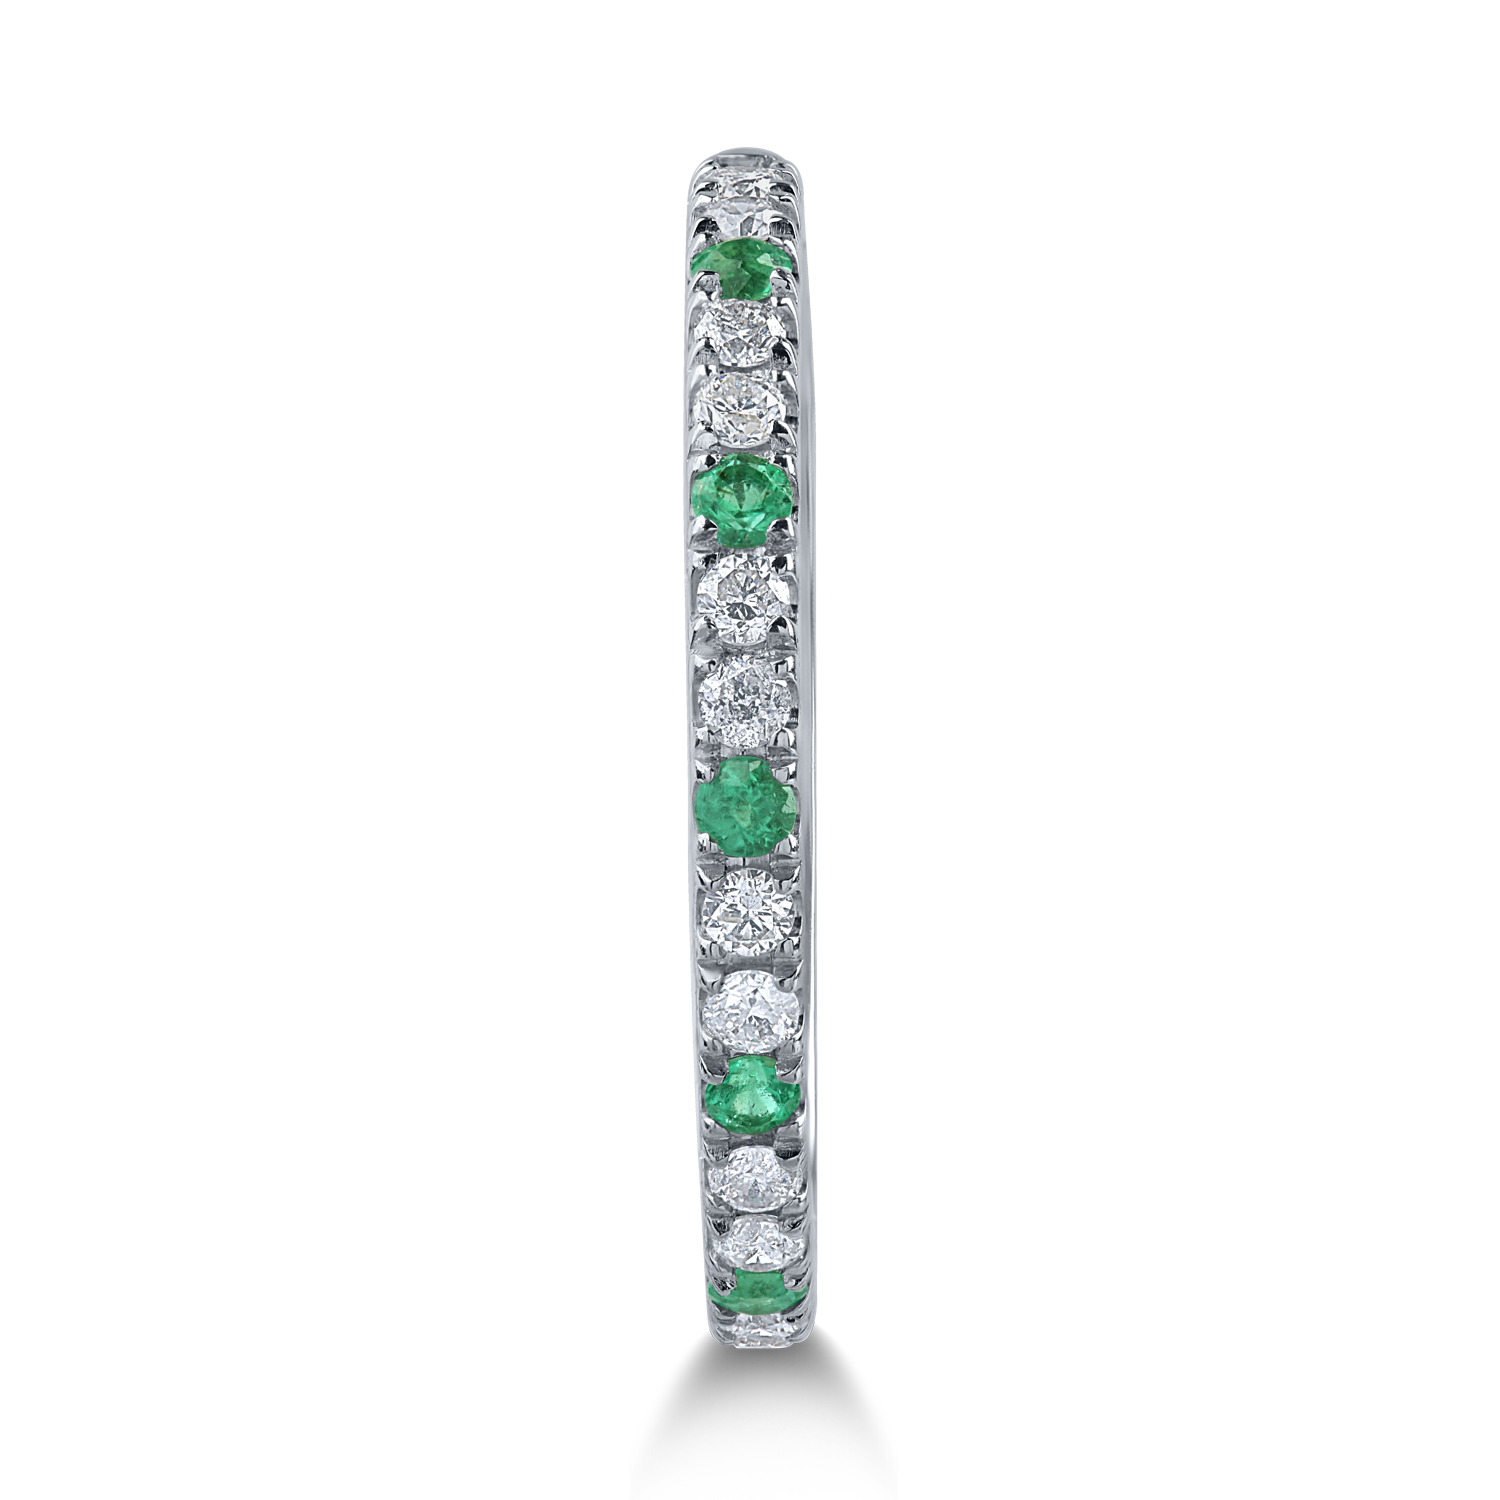 Half eternity ring in white gold with 0.15ct diamonds and 0.06ct emeralds